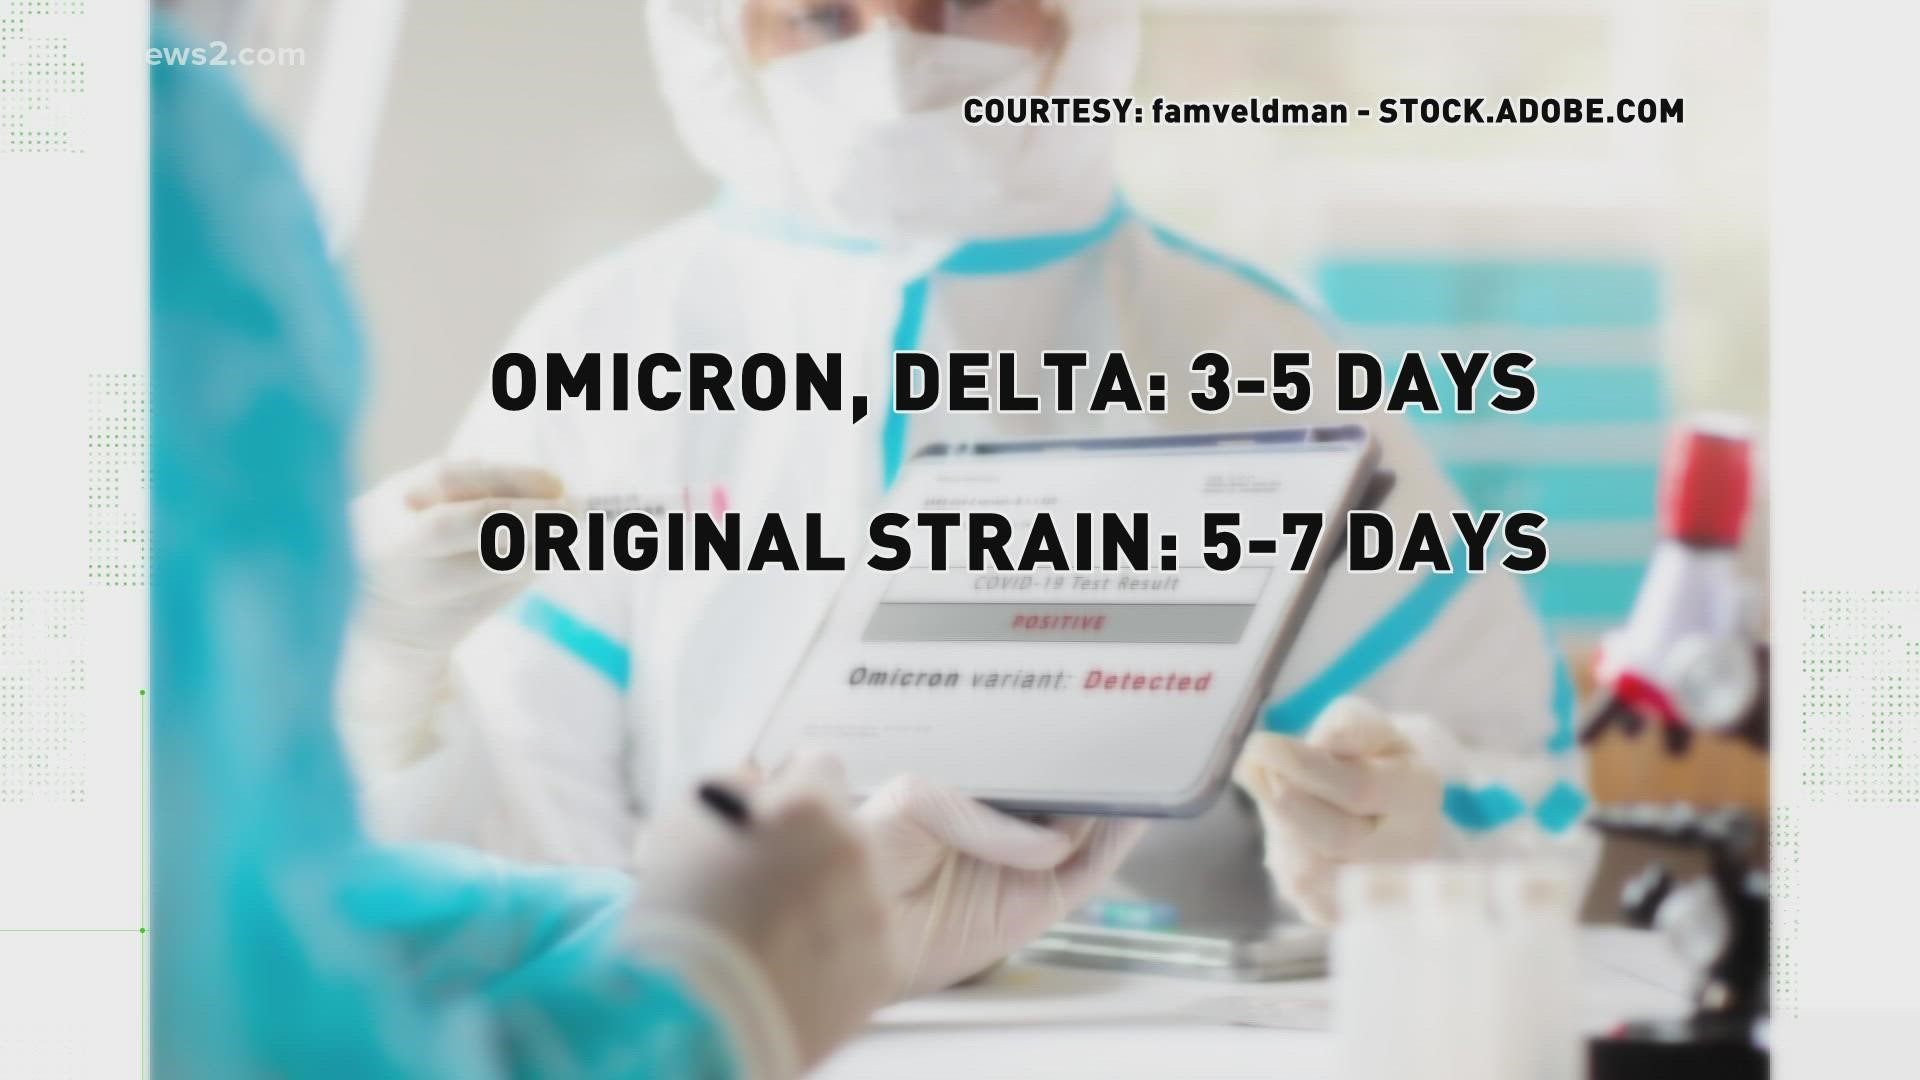 Knowing the optimal test time is key for more accurate results, especially with tests in short supply. Omicron has a faster transmission rate.